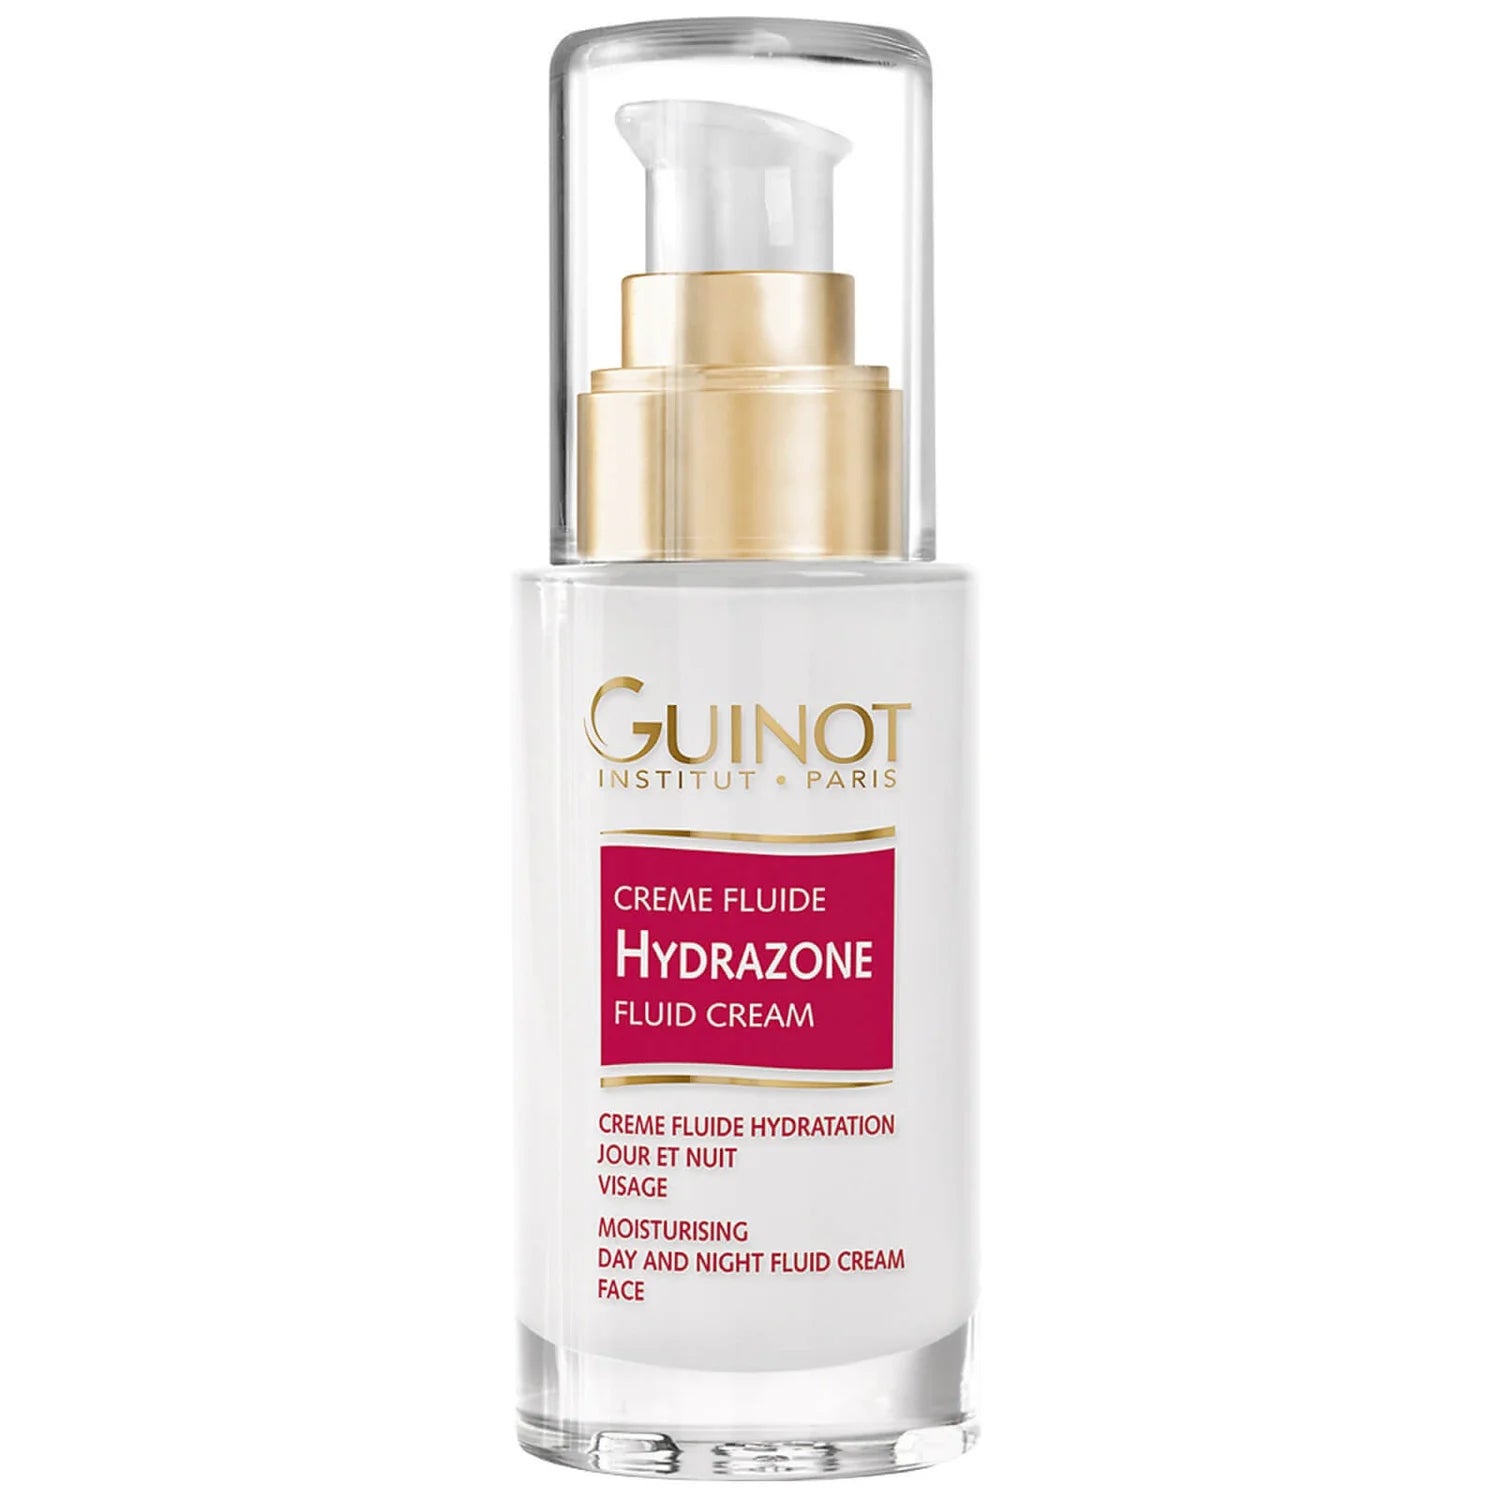 Guinot Hydrazone Fluid product image.